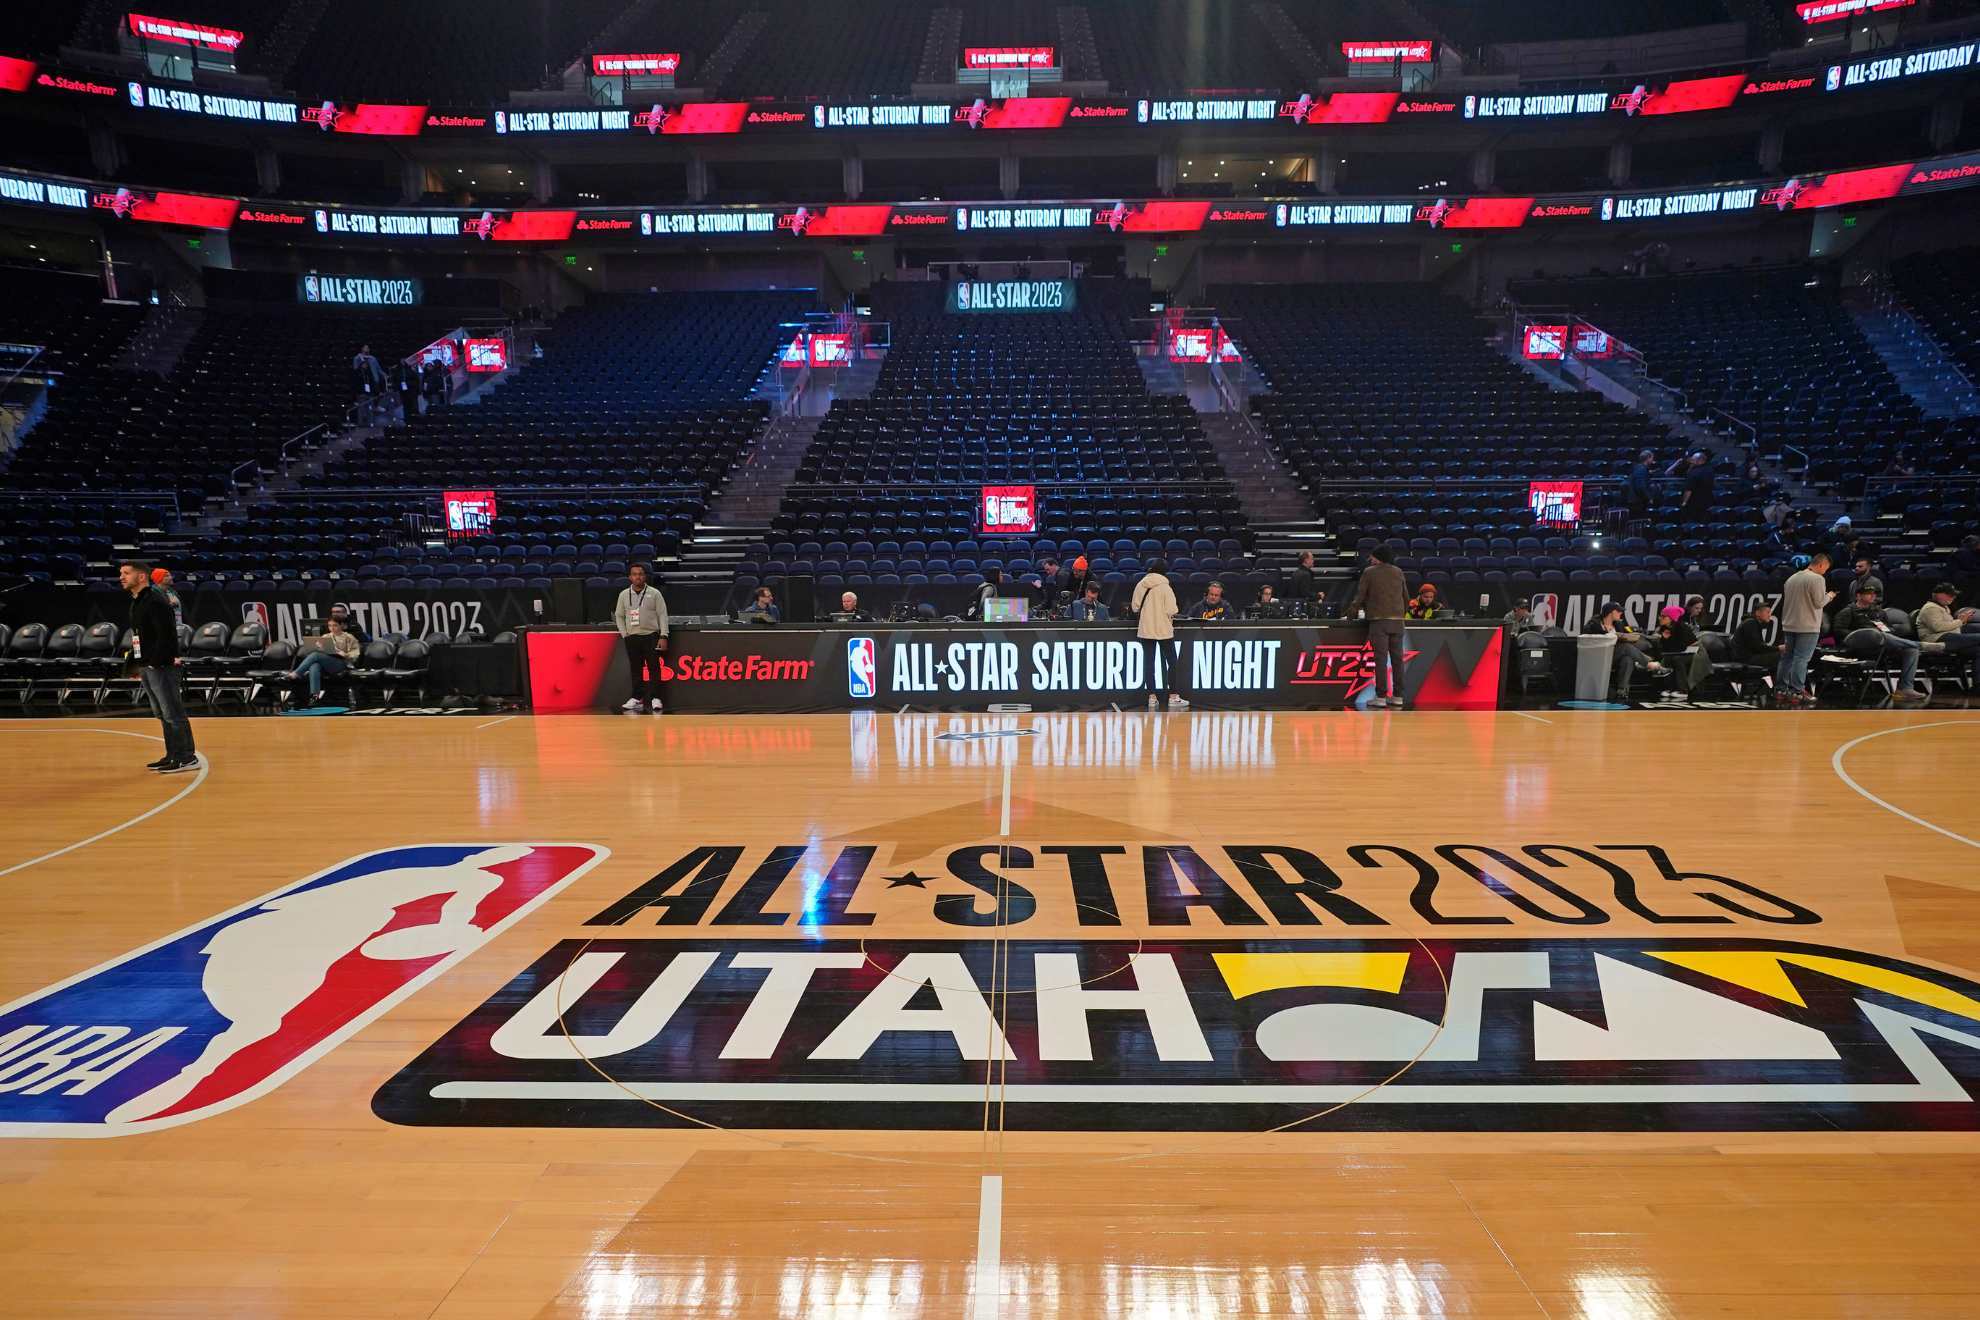 The Vivint Arena is shown during the transformation taking place inside the arena before the start of the NBA basketball All-Star weekend Wednesday, Feb. 15, 2023, in Salt Lake City.